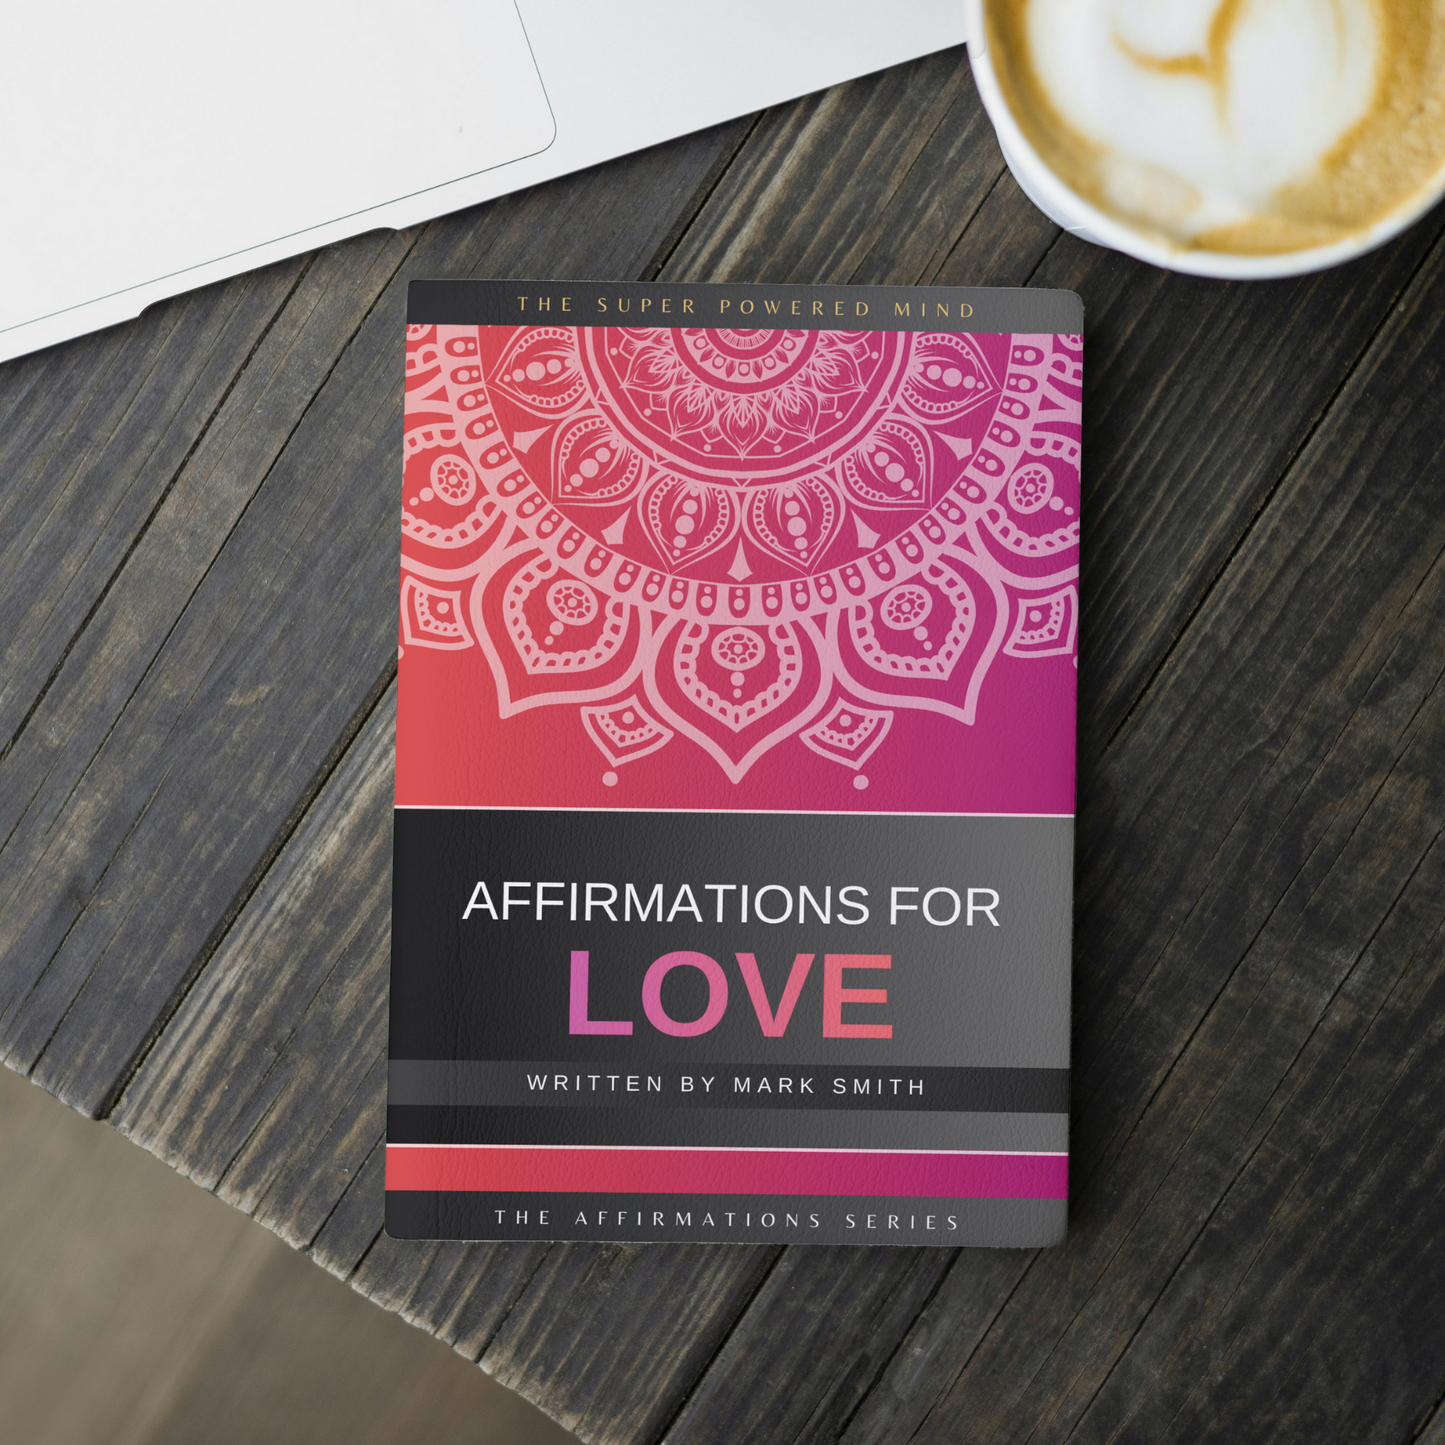 Affirmations for Love (The Affirmations Series) - Written by Mark Smith (Digital Download eBook)